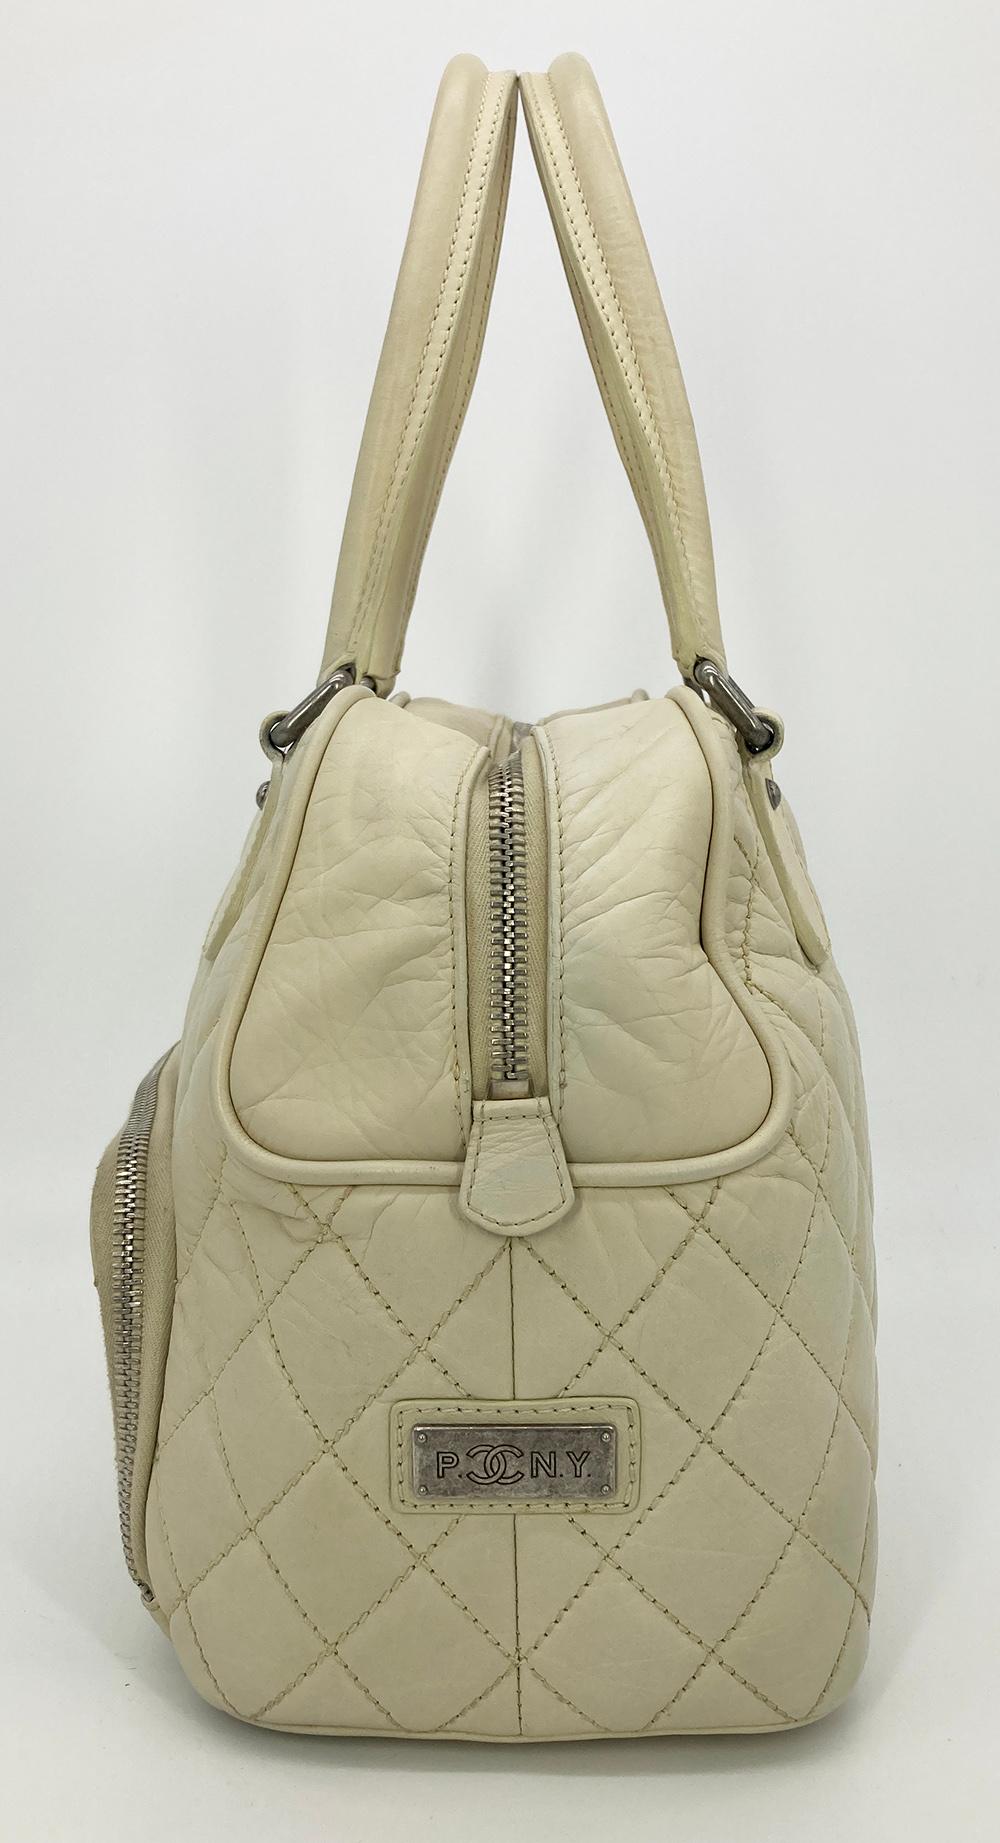 Chanel Paris New York Cream Distressed Bowling Tote In Good Condition For Sale In Philadelphia, PA